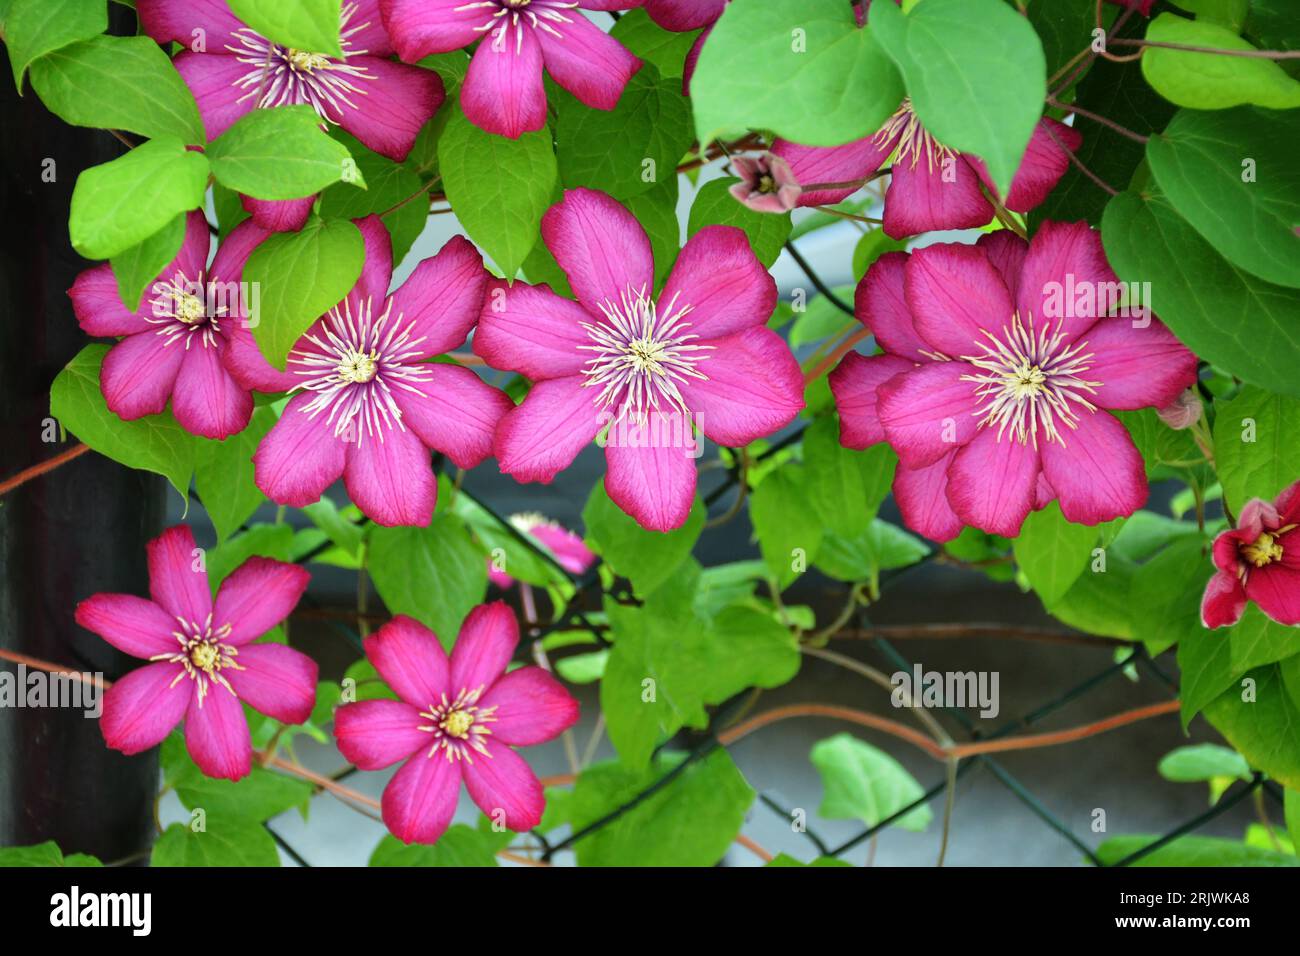 Pink clematis flowers blooming in the garden Stock Photo